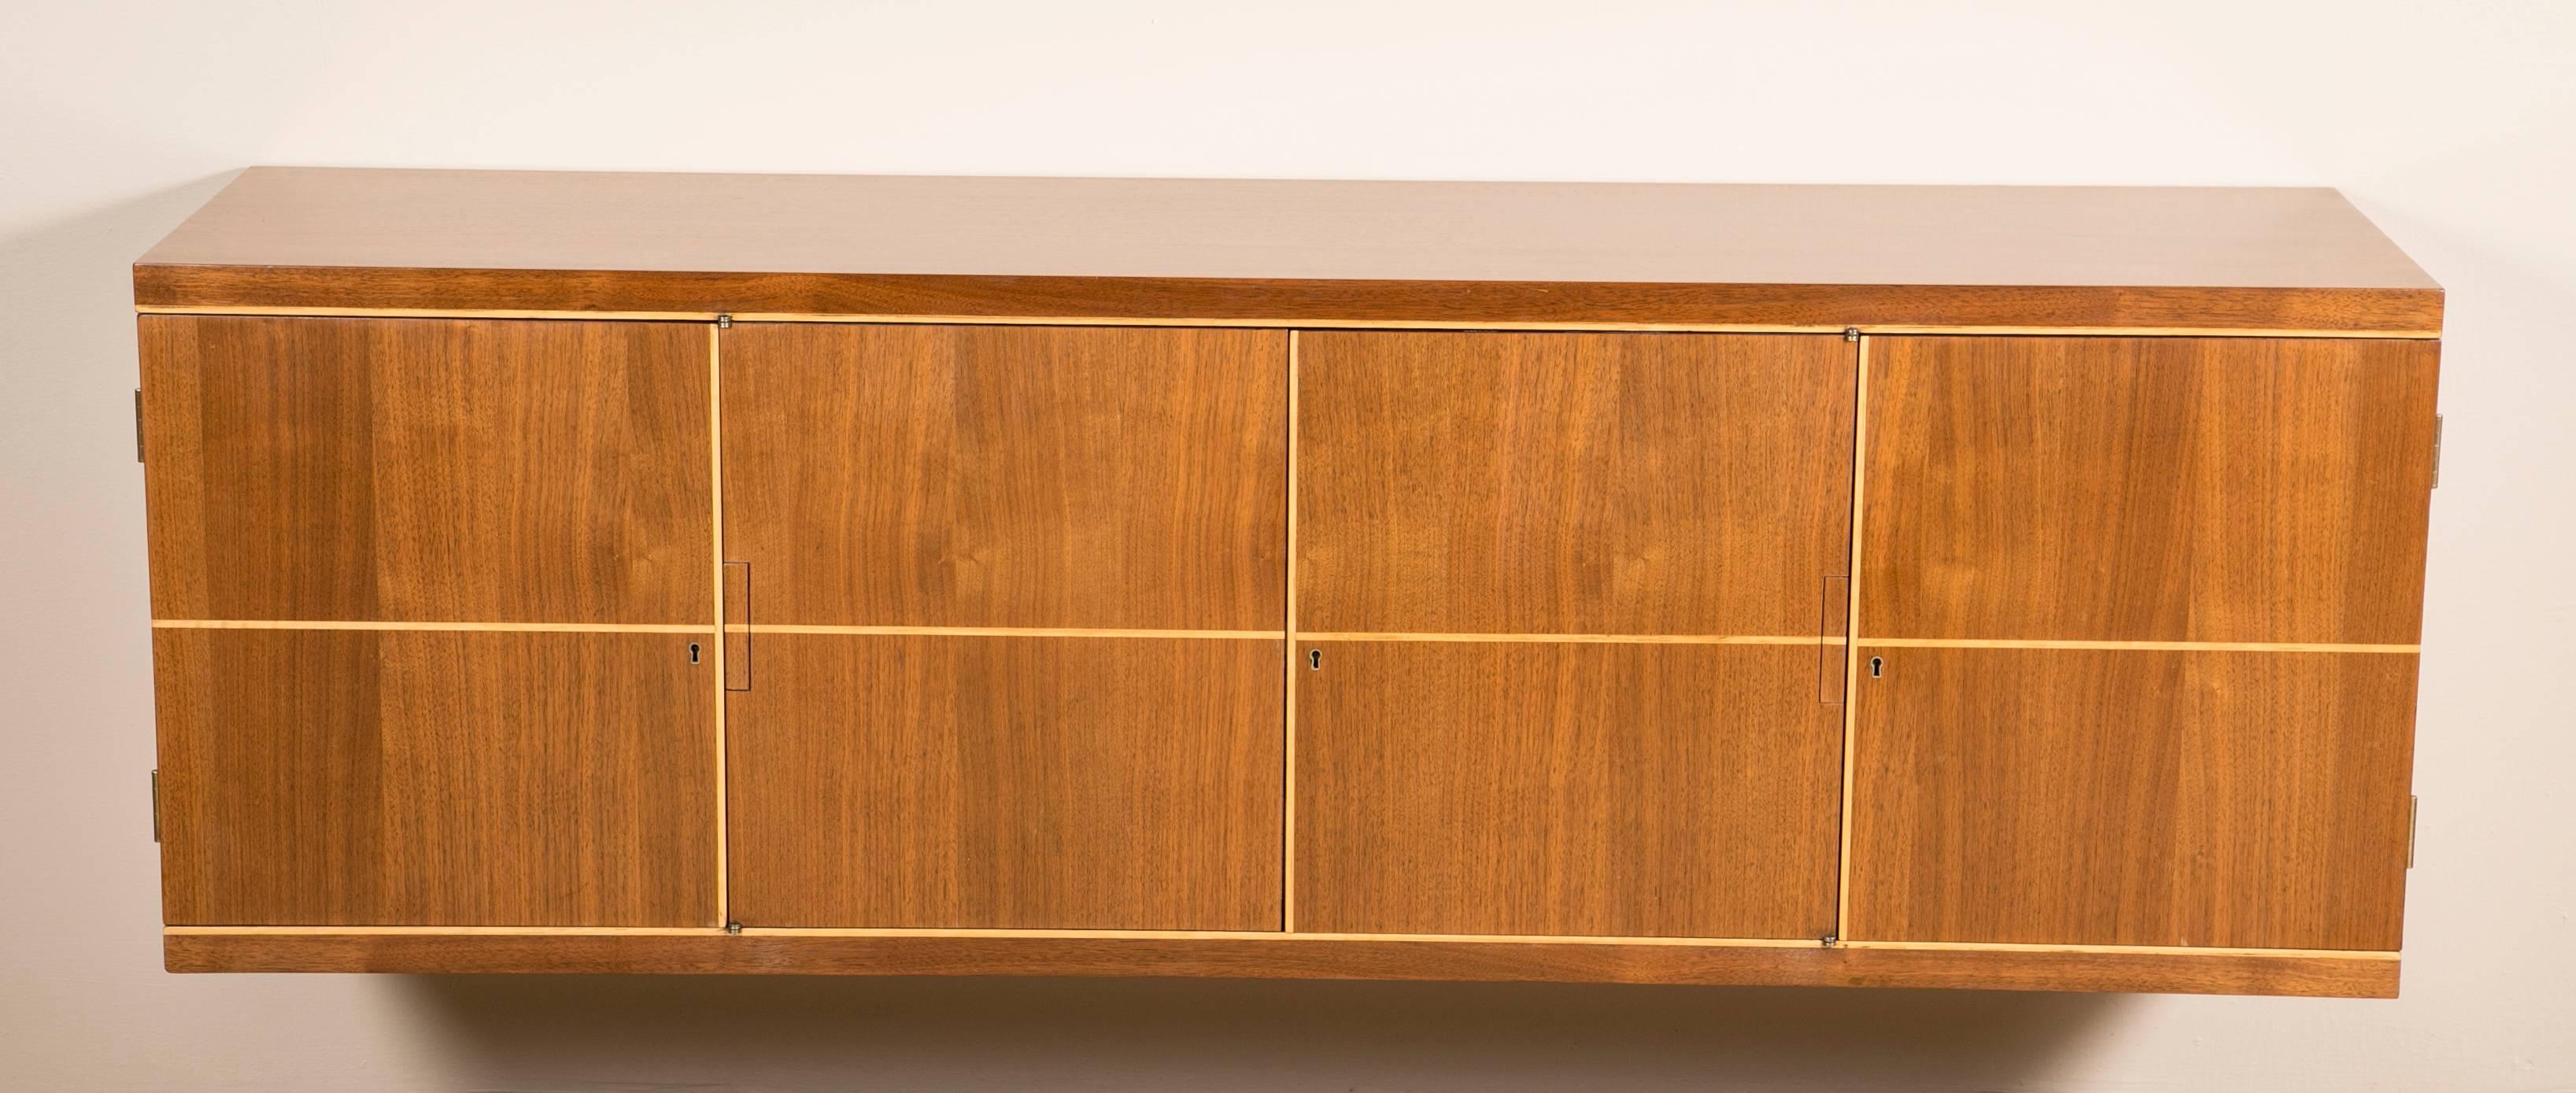 Tommi Parzinger design four-section walnut wall mounted credenza.